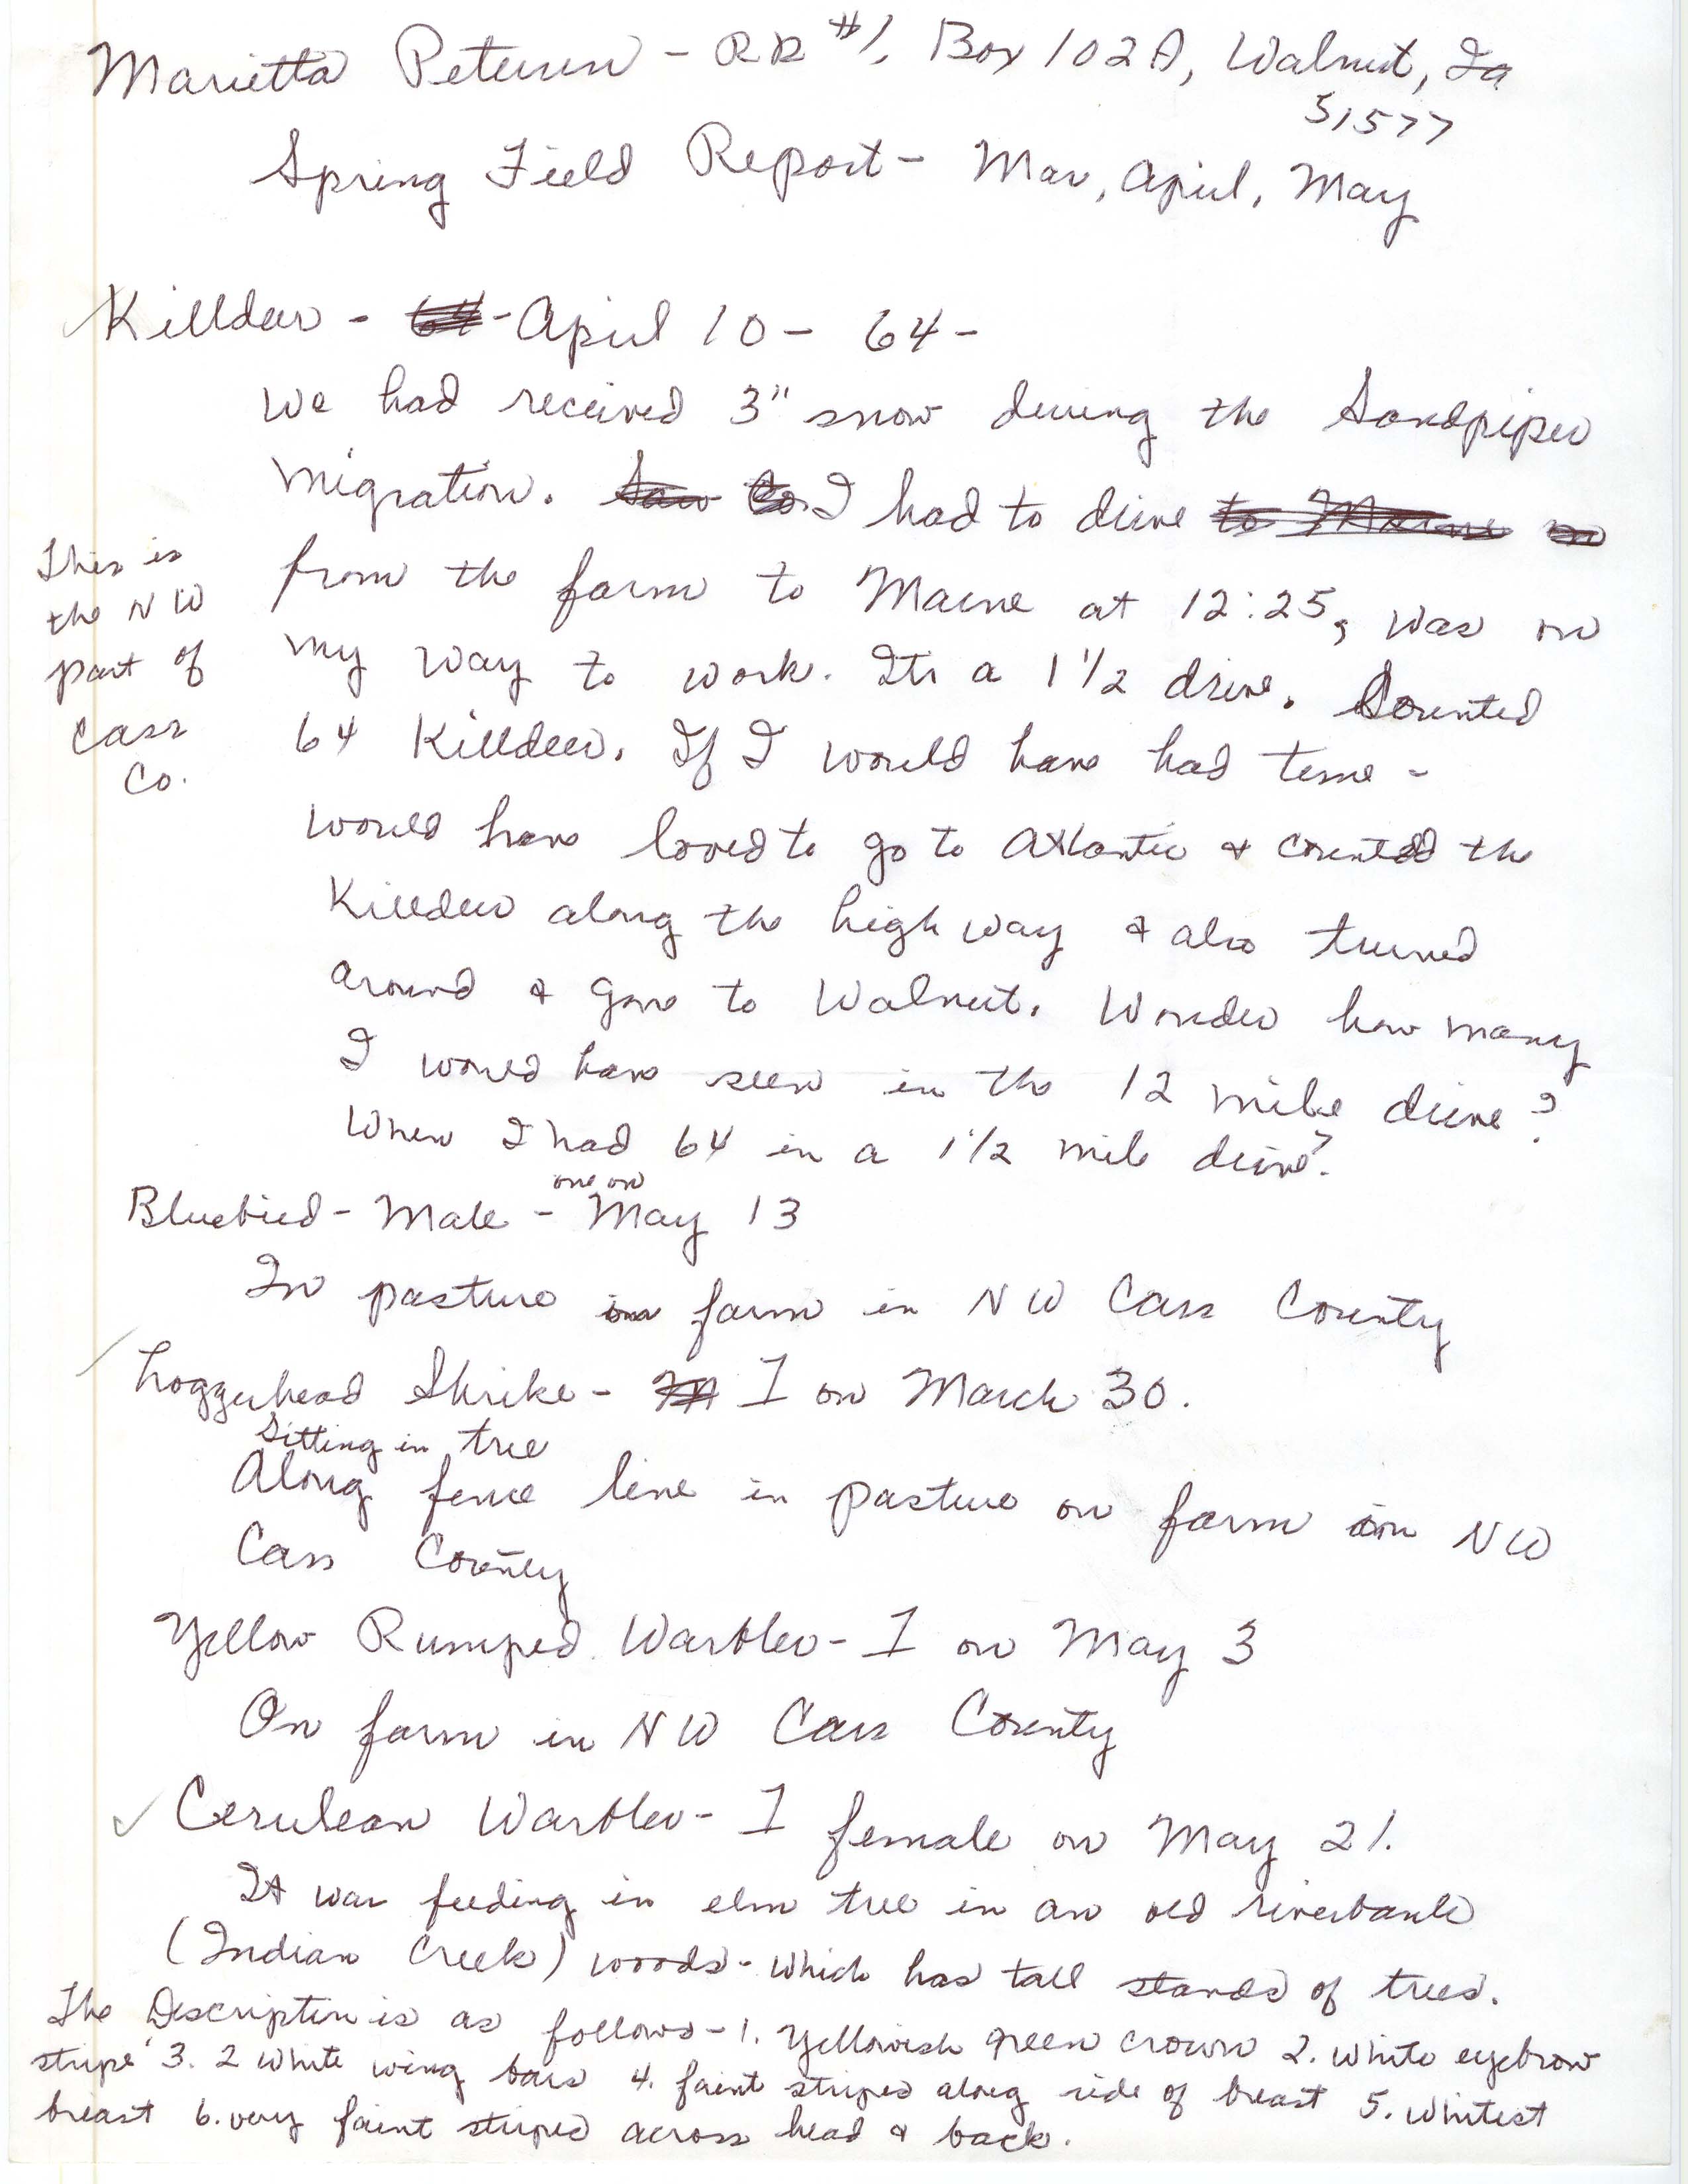 Field notes contributed by Marietta Petersen, spring 1997